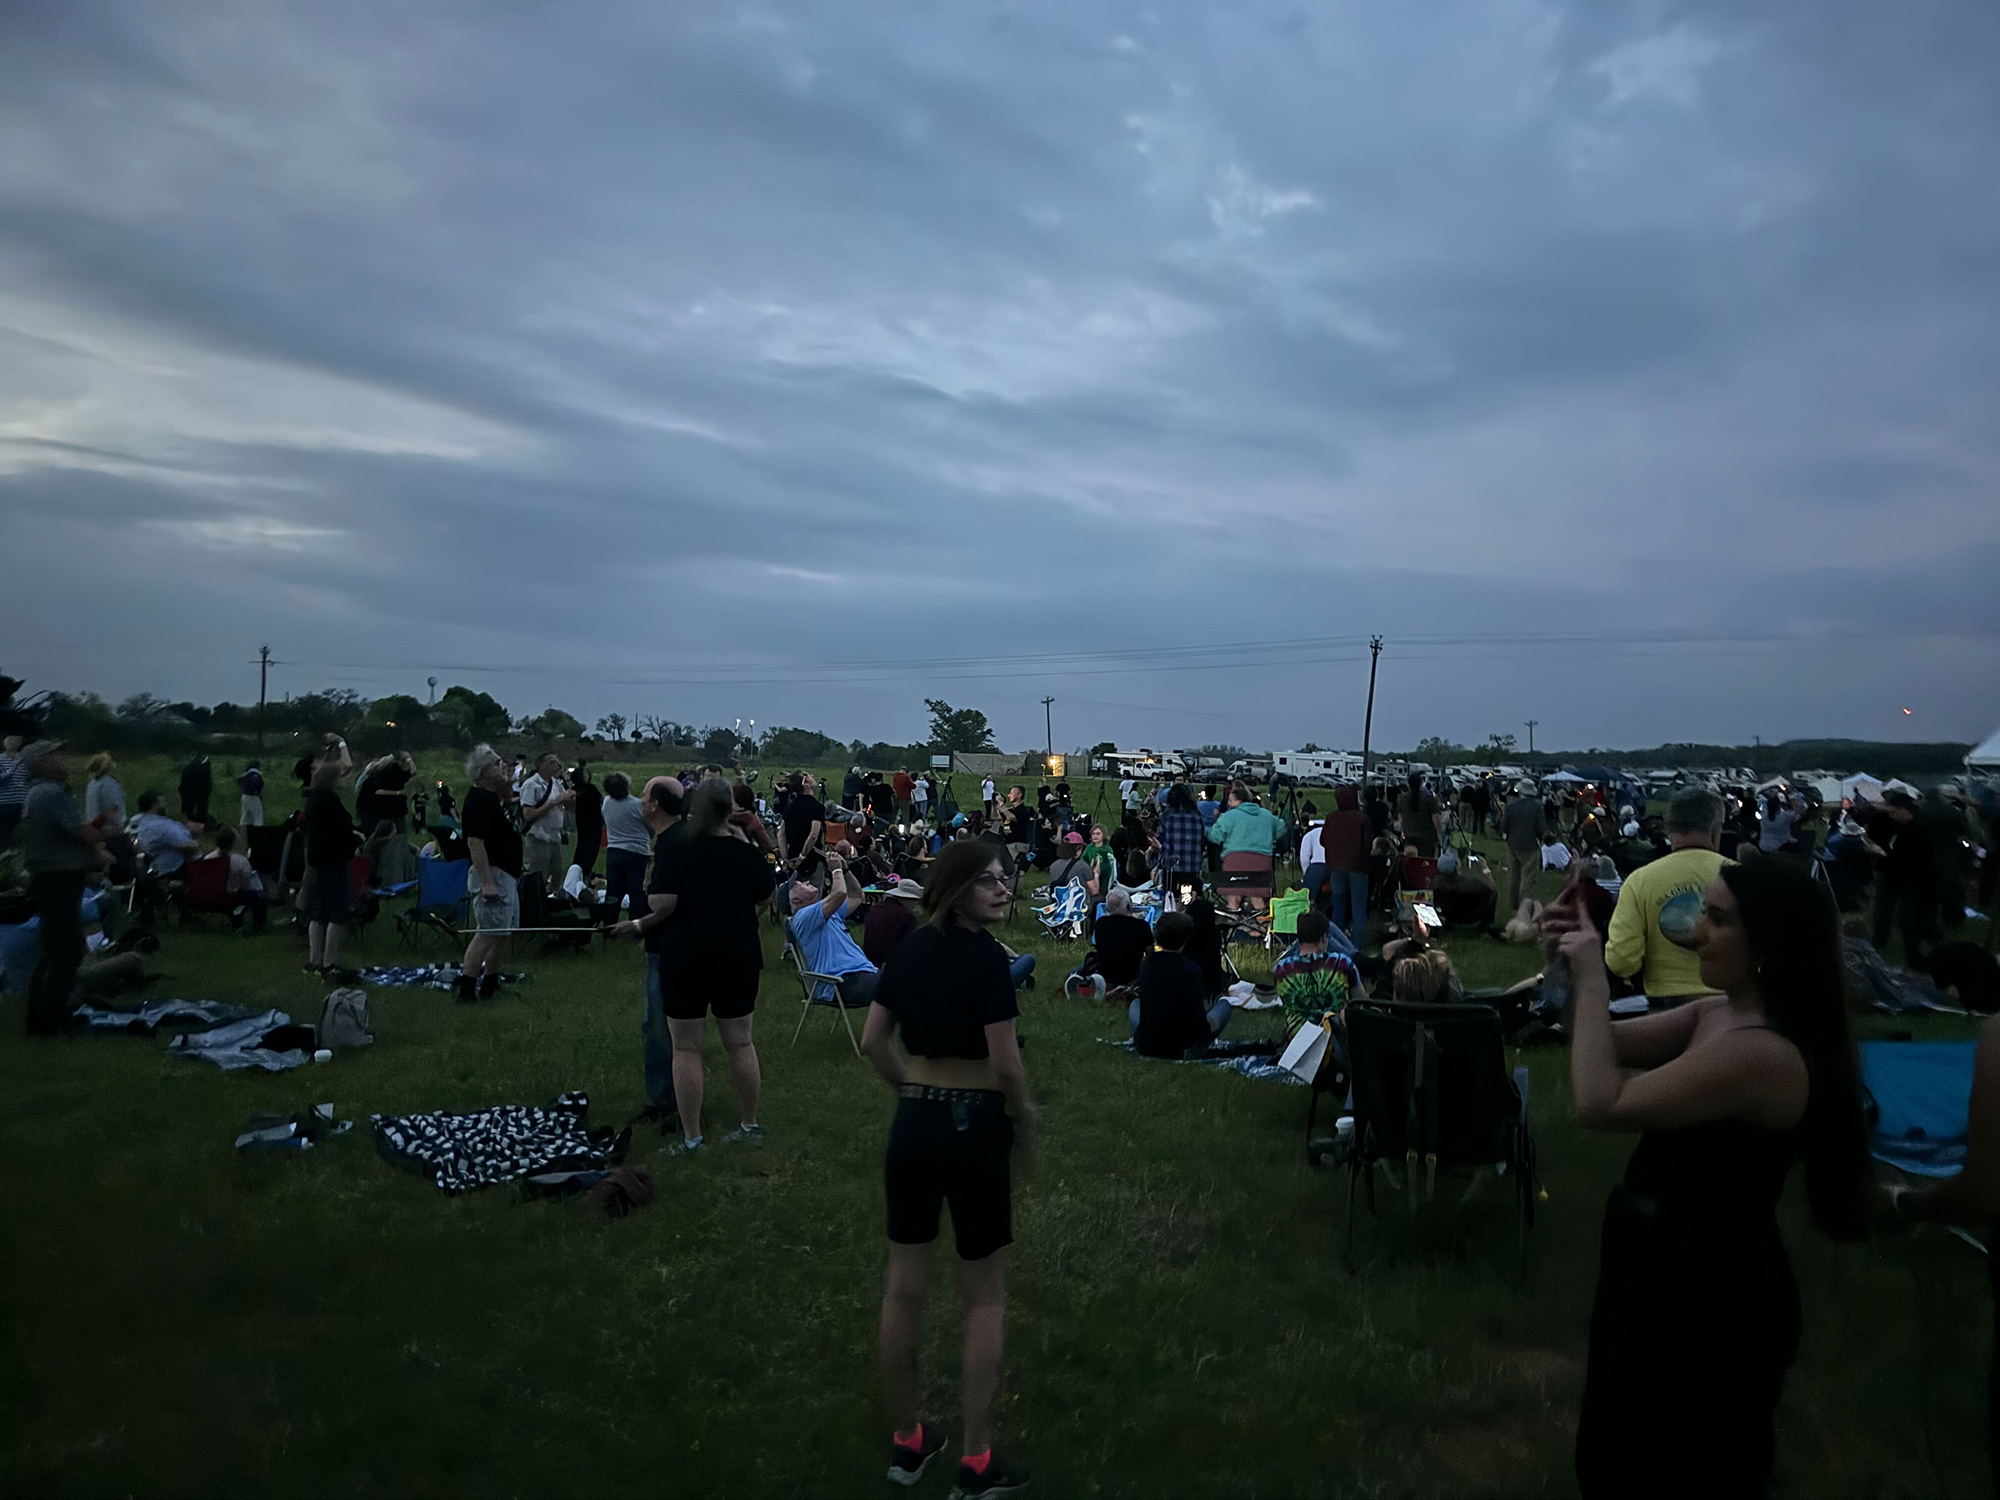 The sky darkened as totality passed over Fredericksburg, Texas.